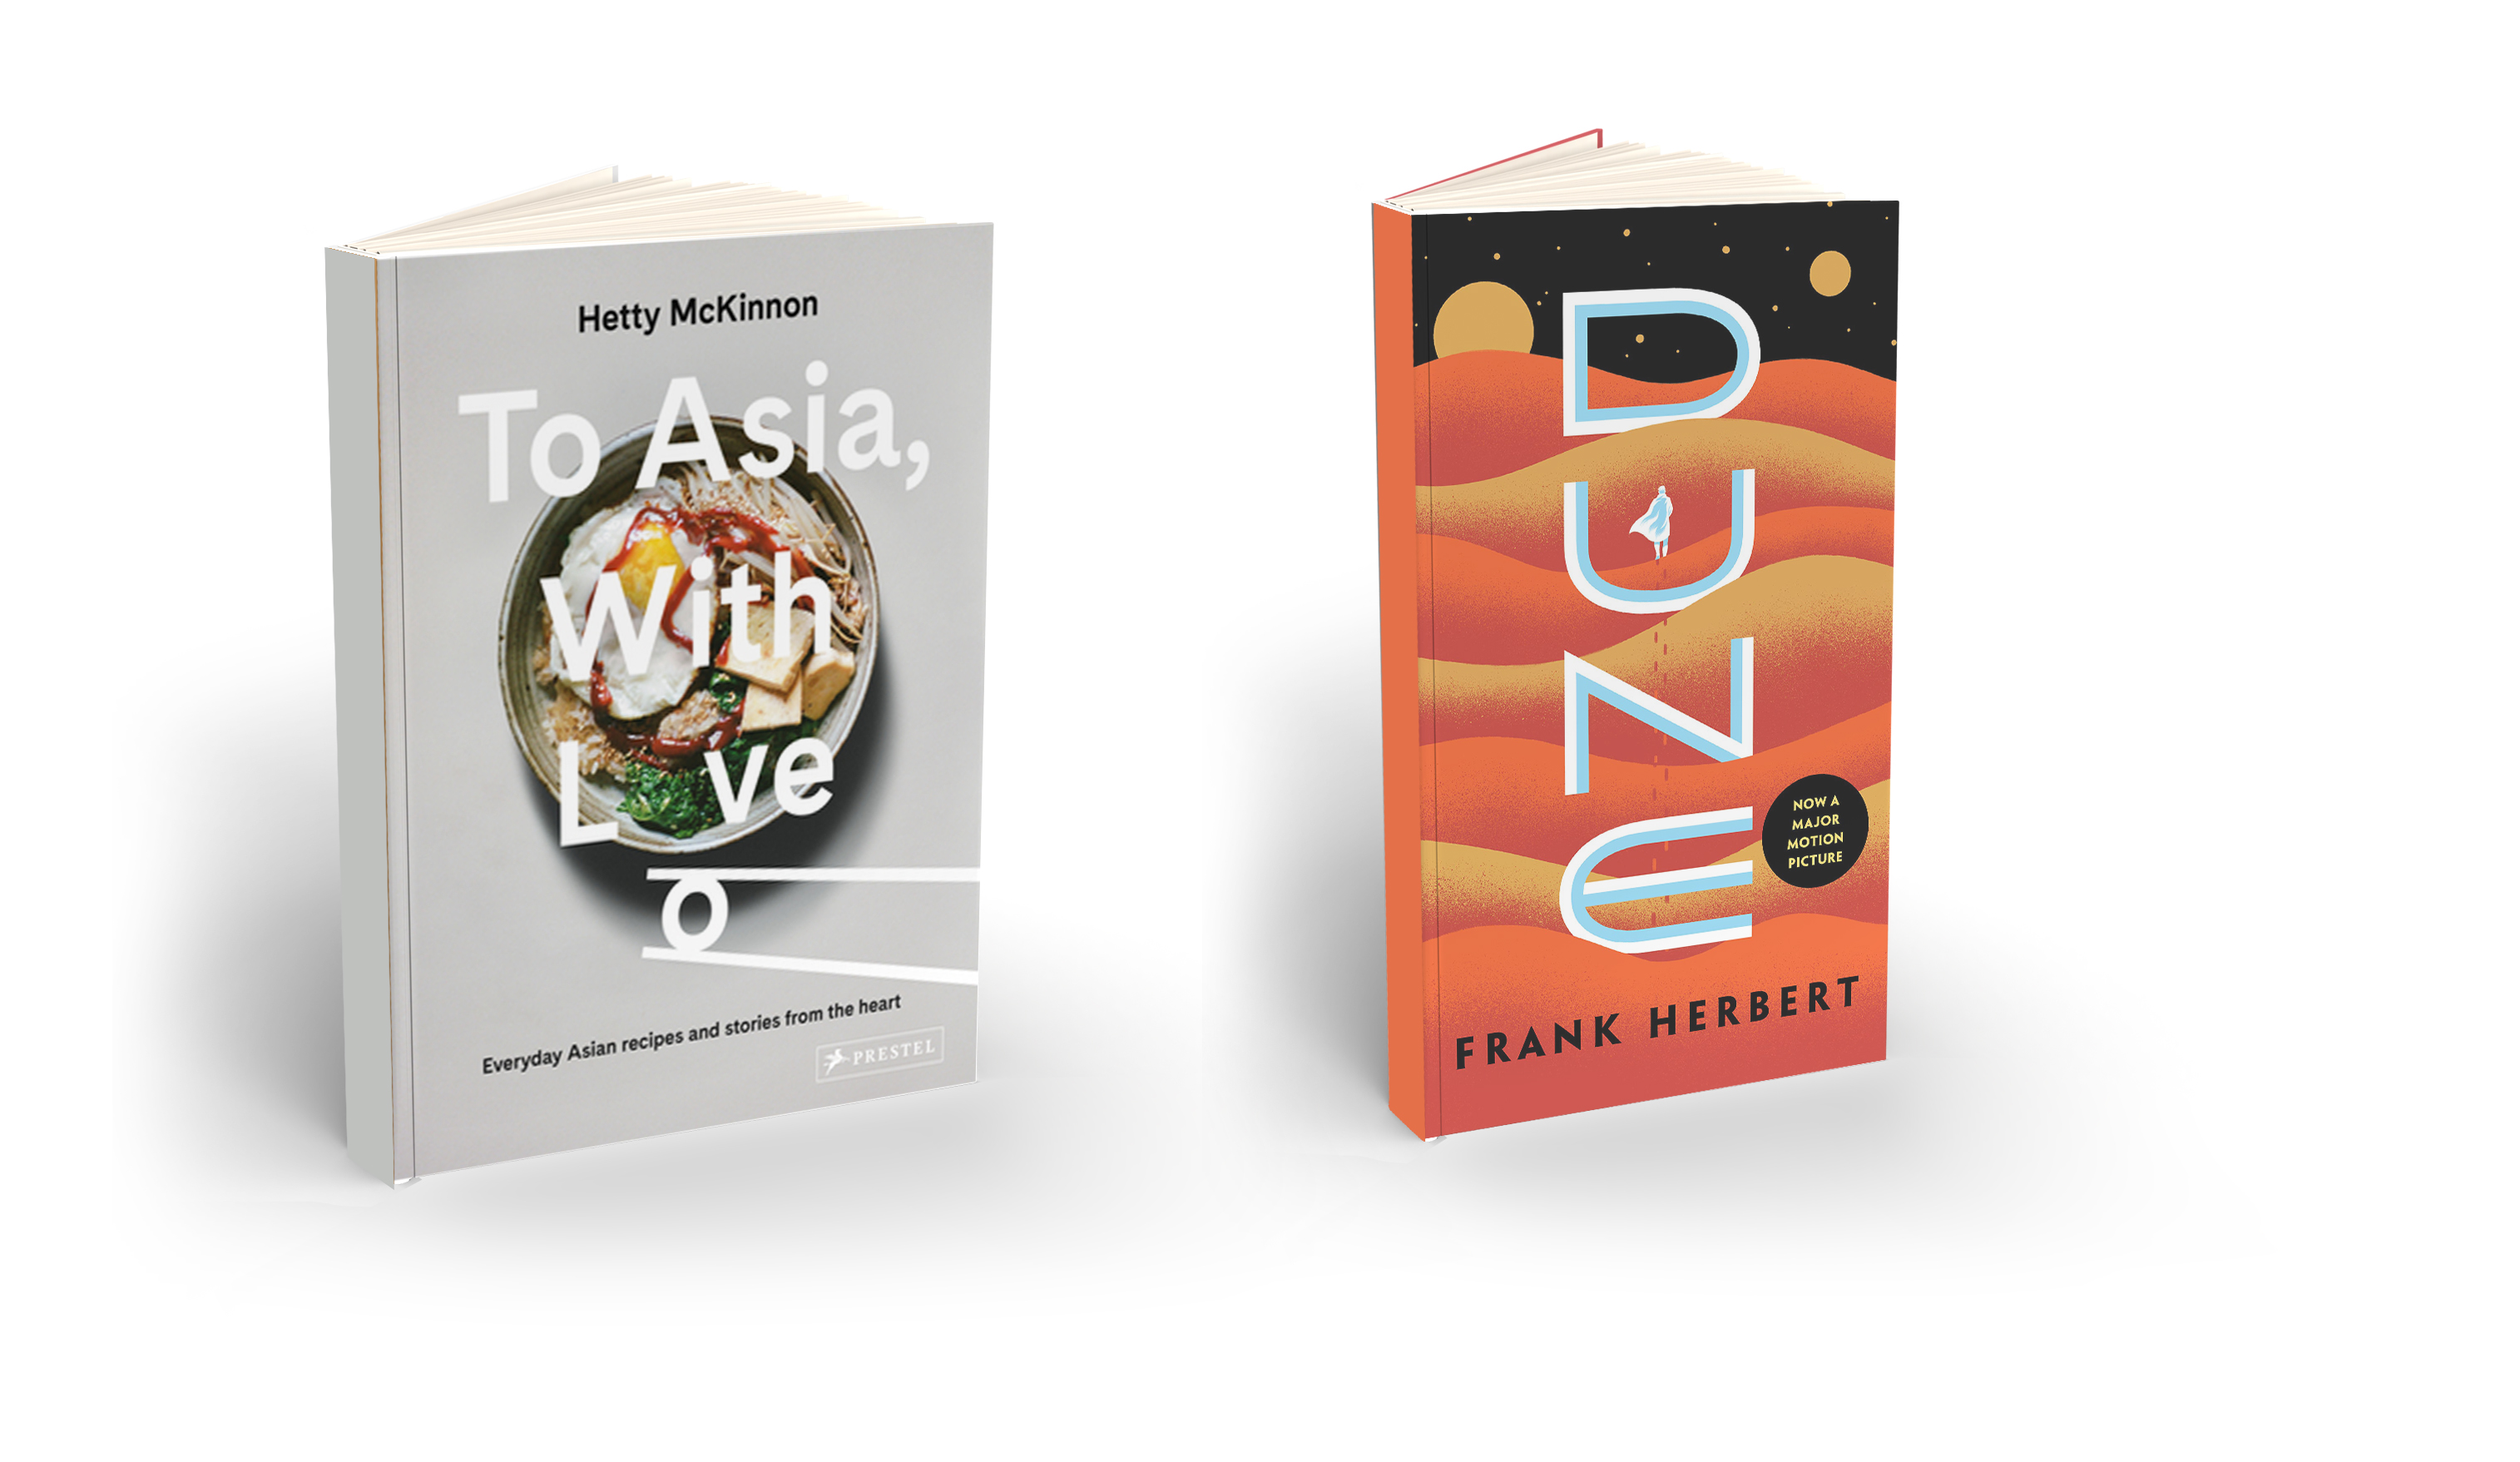 The typography of two book covers on display: "To Asia, With Love" and "Dune".